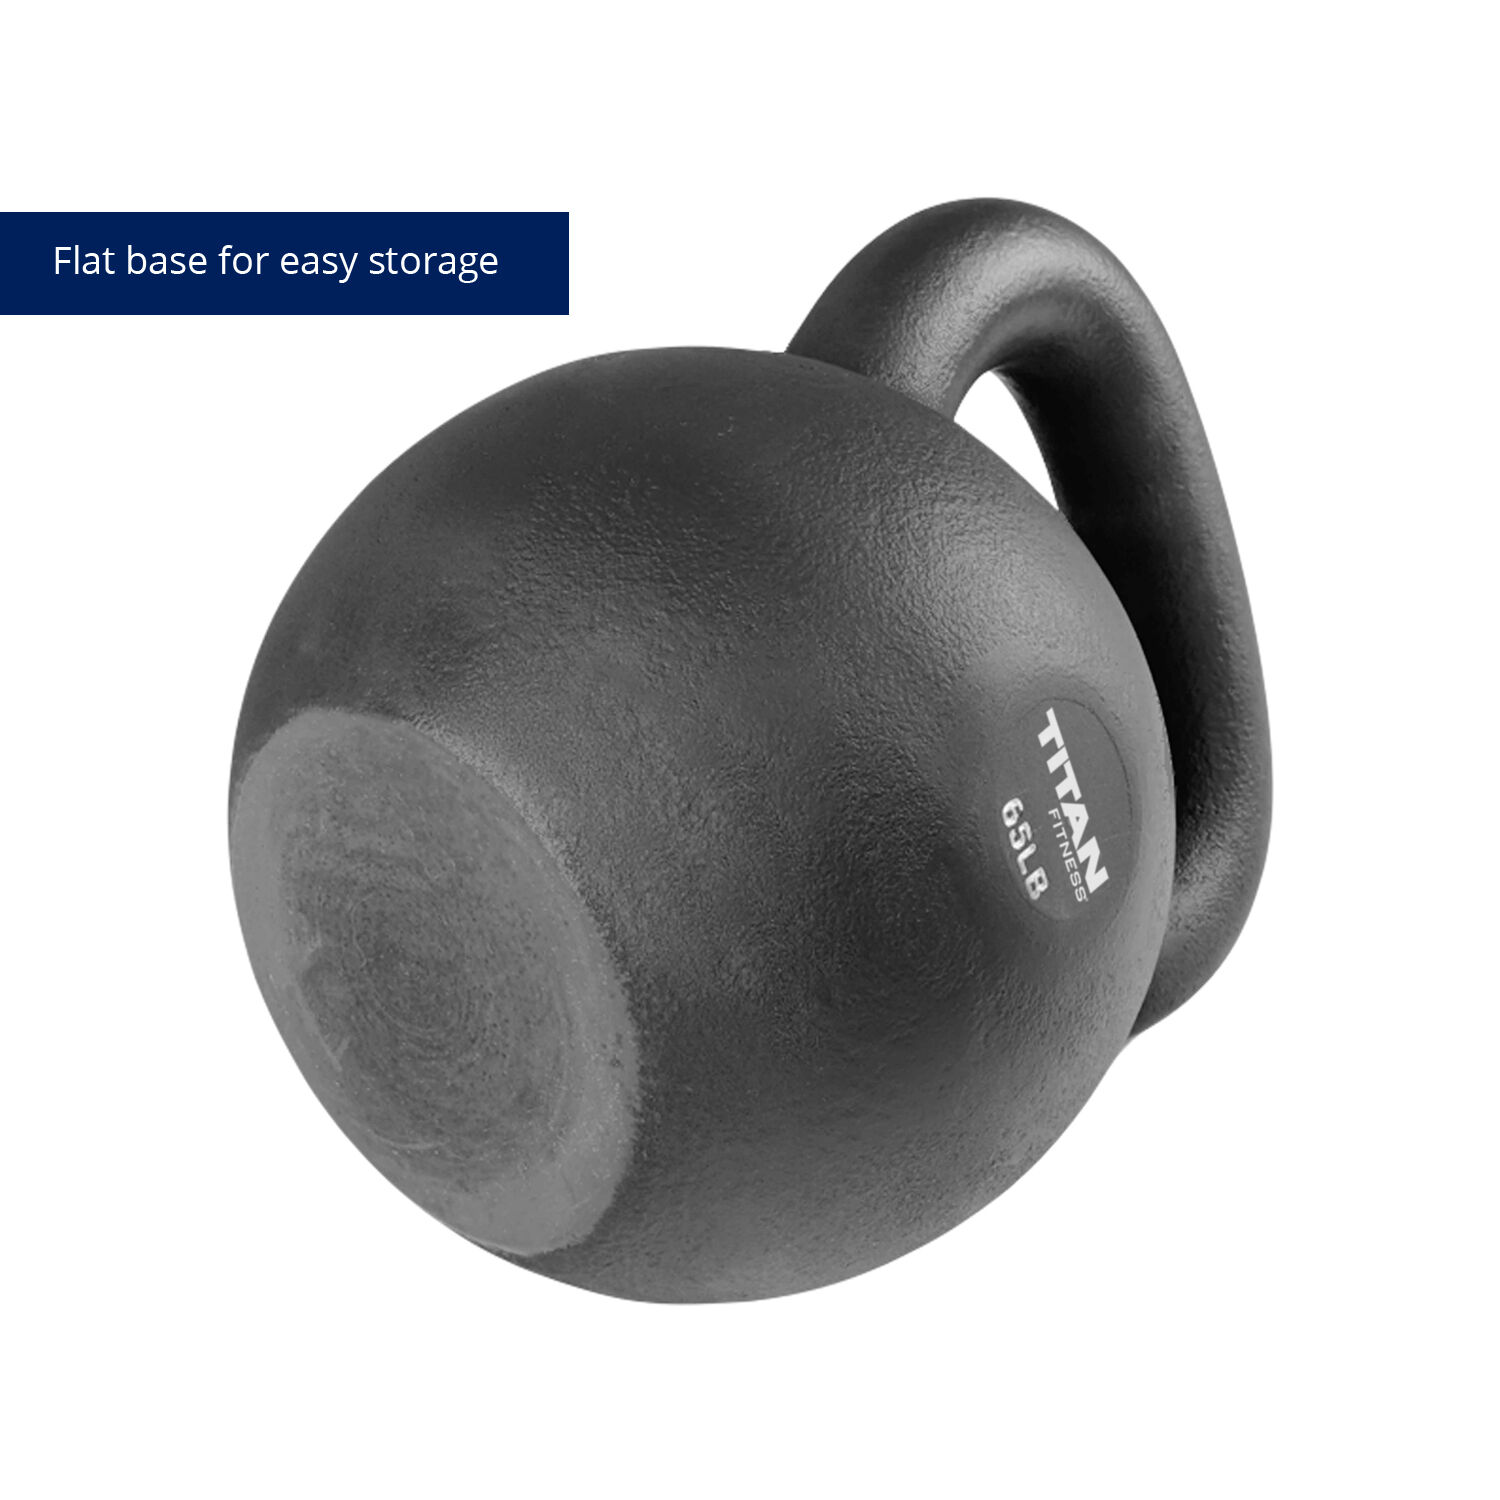 LB and KG Markings Single Piece Casting Full Body Workout Titan Fitness 65 LB Cast Iron Kettlebell 